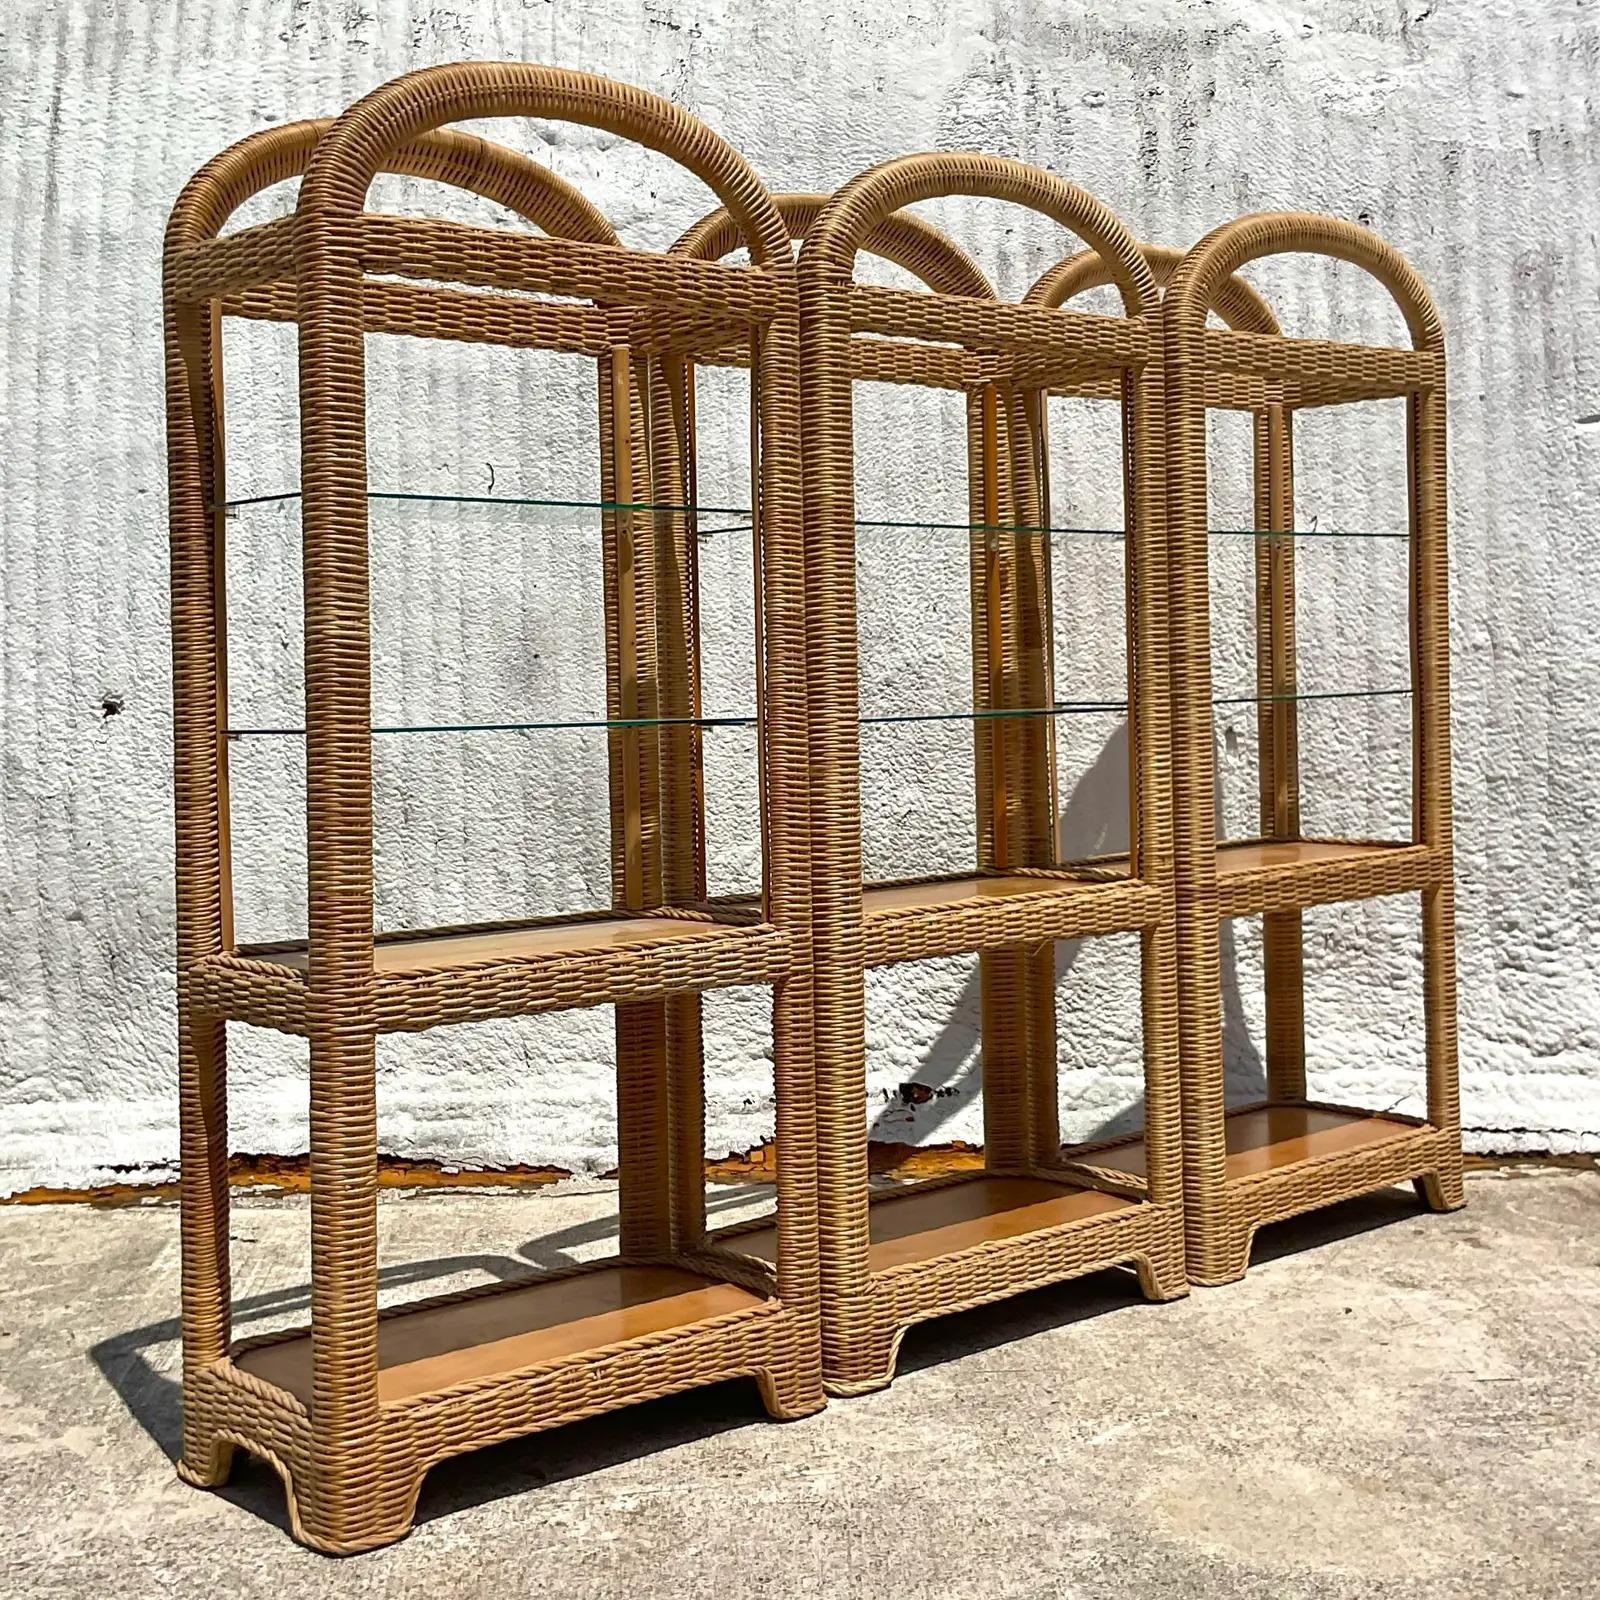 A fabulous set of three vintage Coastal etagere. Chic woven rattan in a clean arched design. Inset glass shelves. Acquired from a Palm Beach estate.

The etagere is in great vintage condition. Minor scuffs and blemishes appropriate to their age